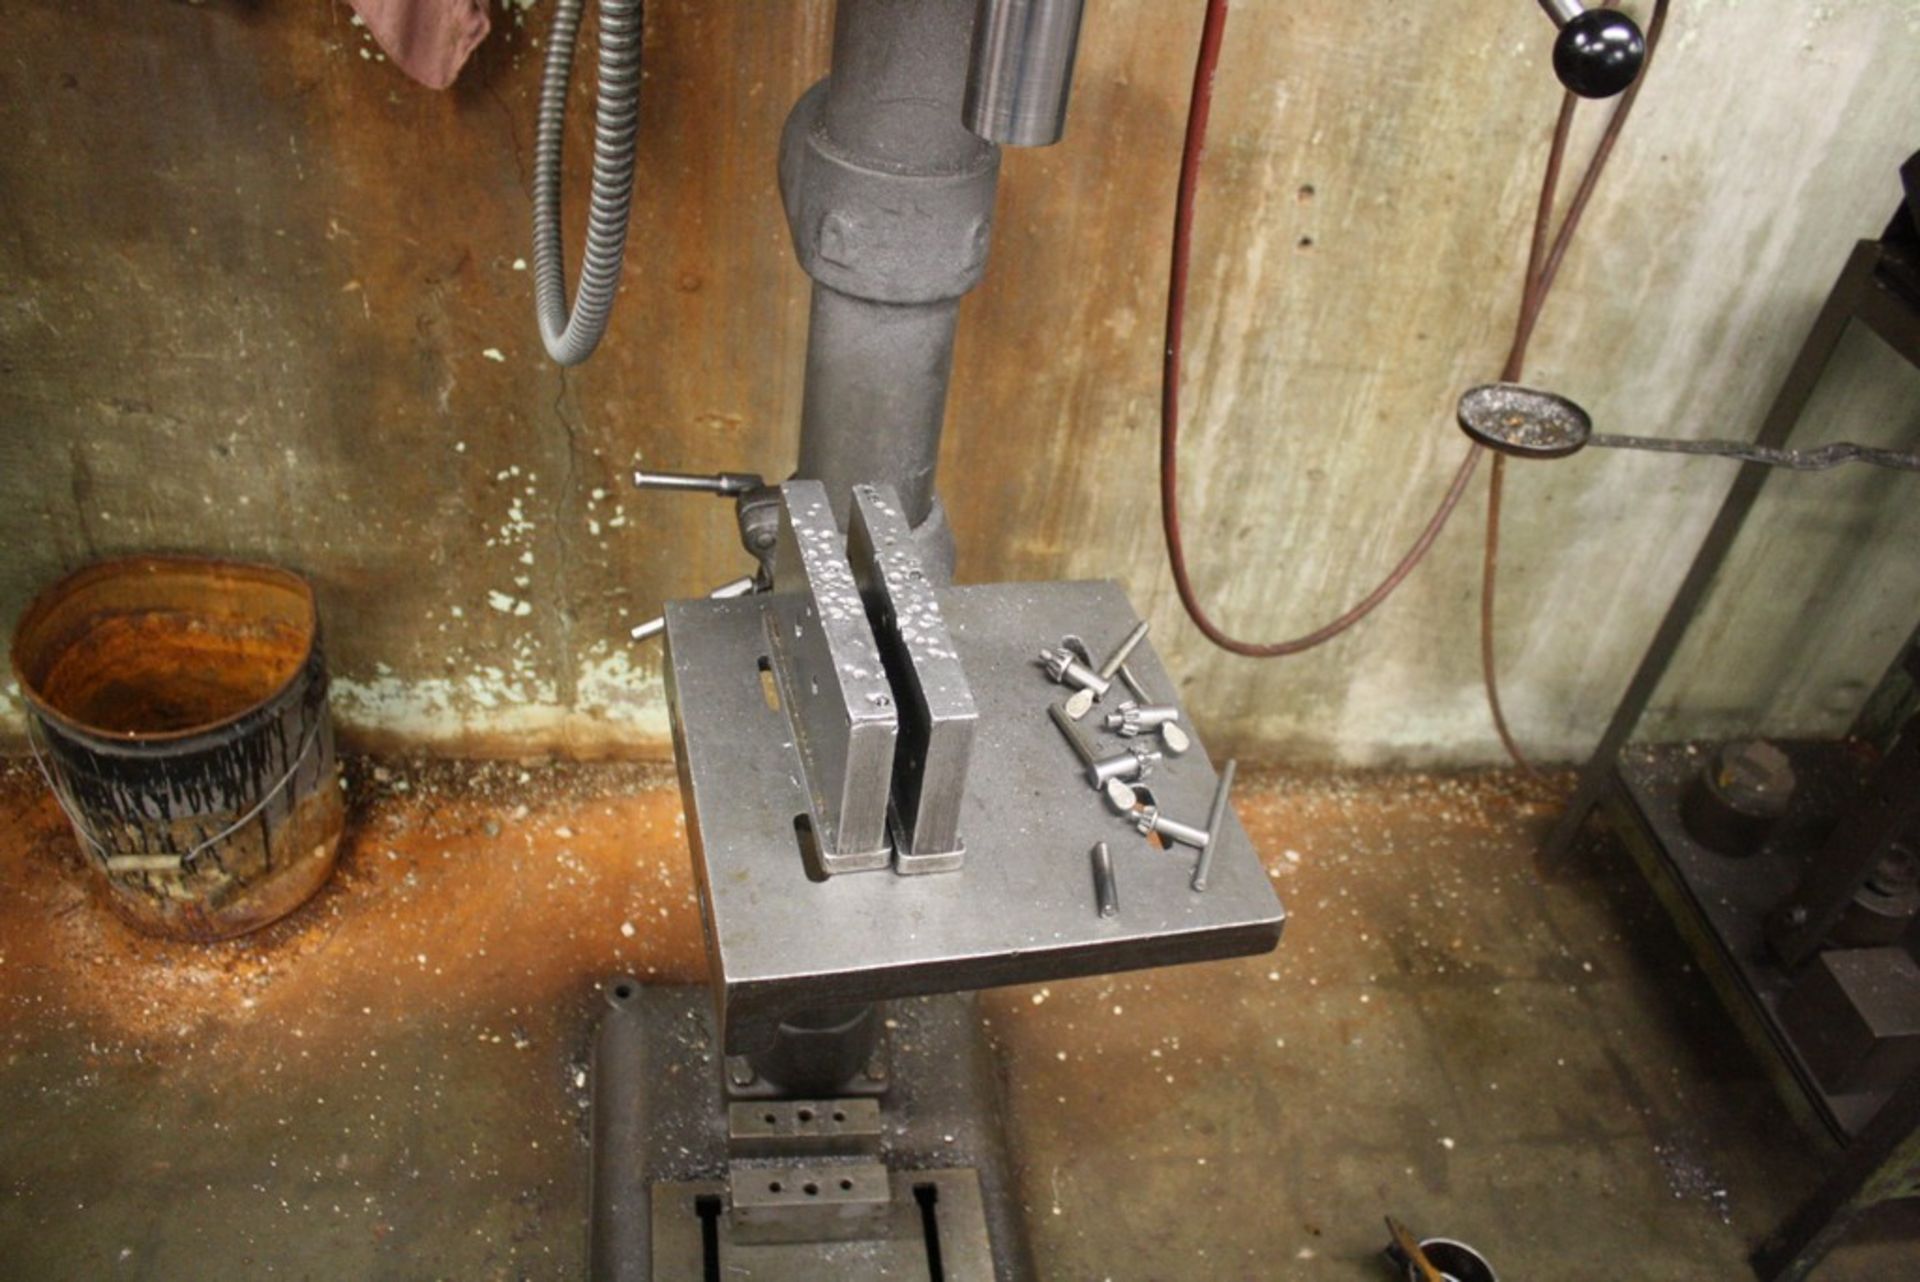 BUFFALO 18” STEP-PULLEY VARIABLE SPEED FLOOR STANDING DRILL PRESS - Image 3 of 3